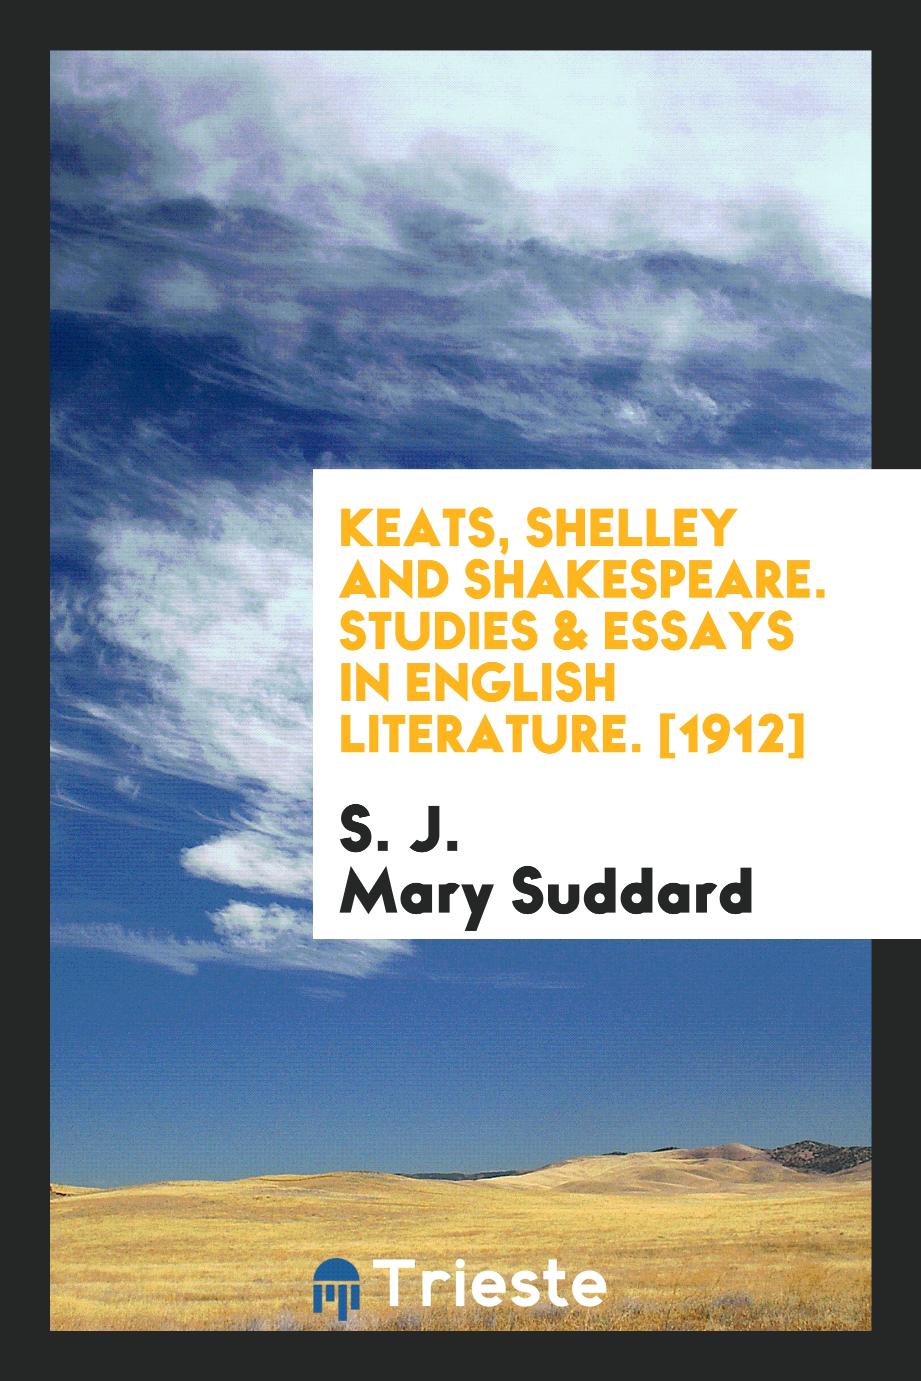 Keats, Shelley and Shakespeare. Studies & Essays in English Literature. [1912]